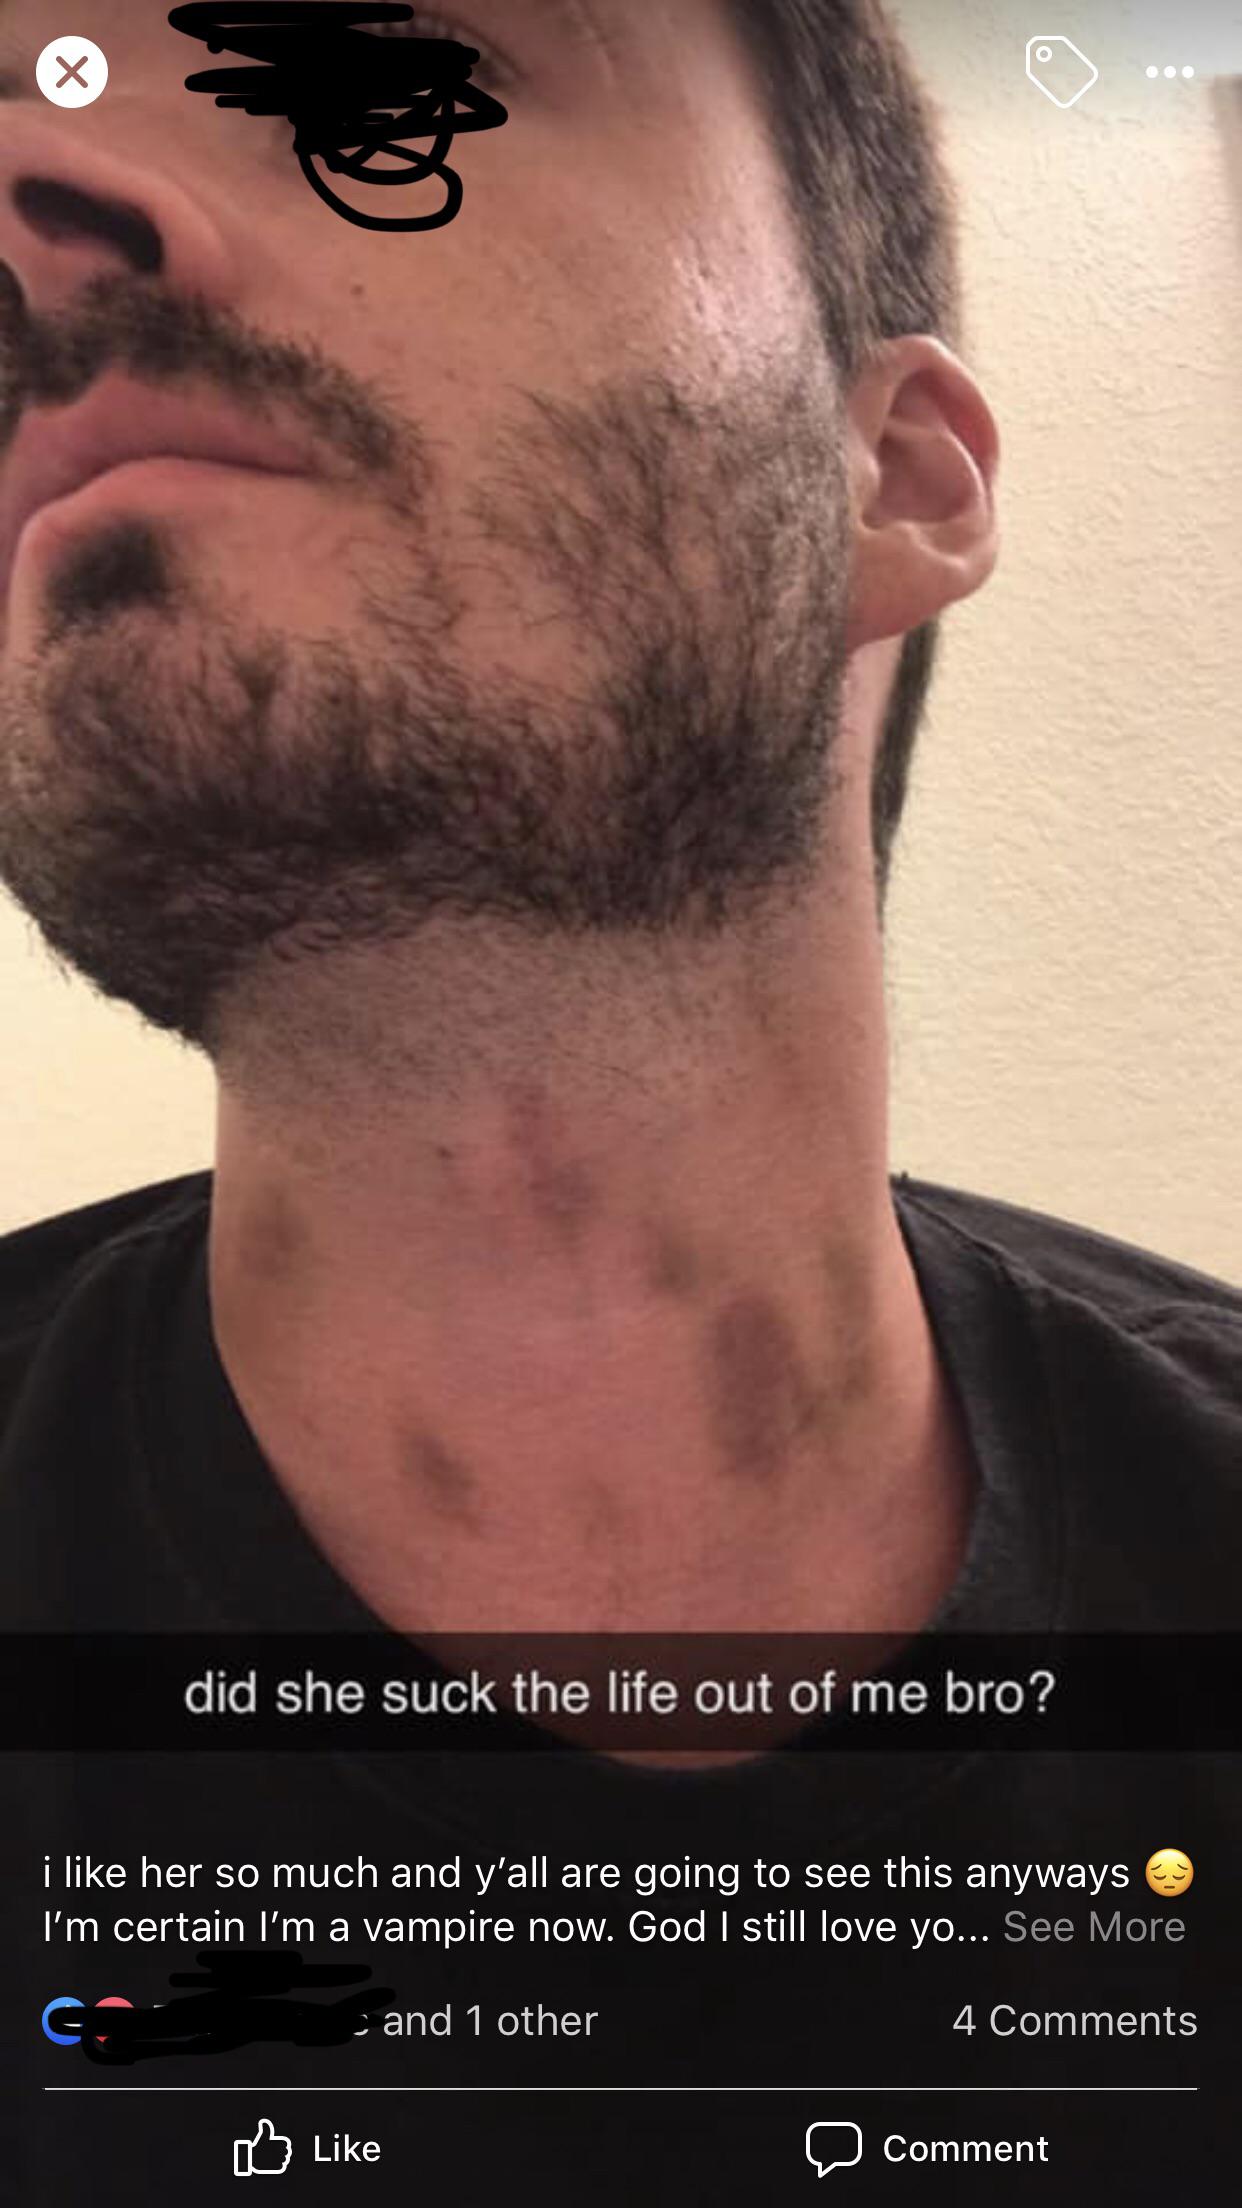 hickies on nck - did she suck the life out of me bro? i her so much and y'all are going to see this anyways I'm certain I'm a vampire now. God I still love yo... See More C and 1 other 4 Comment